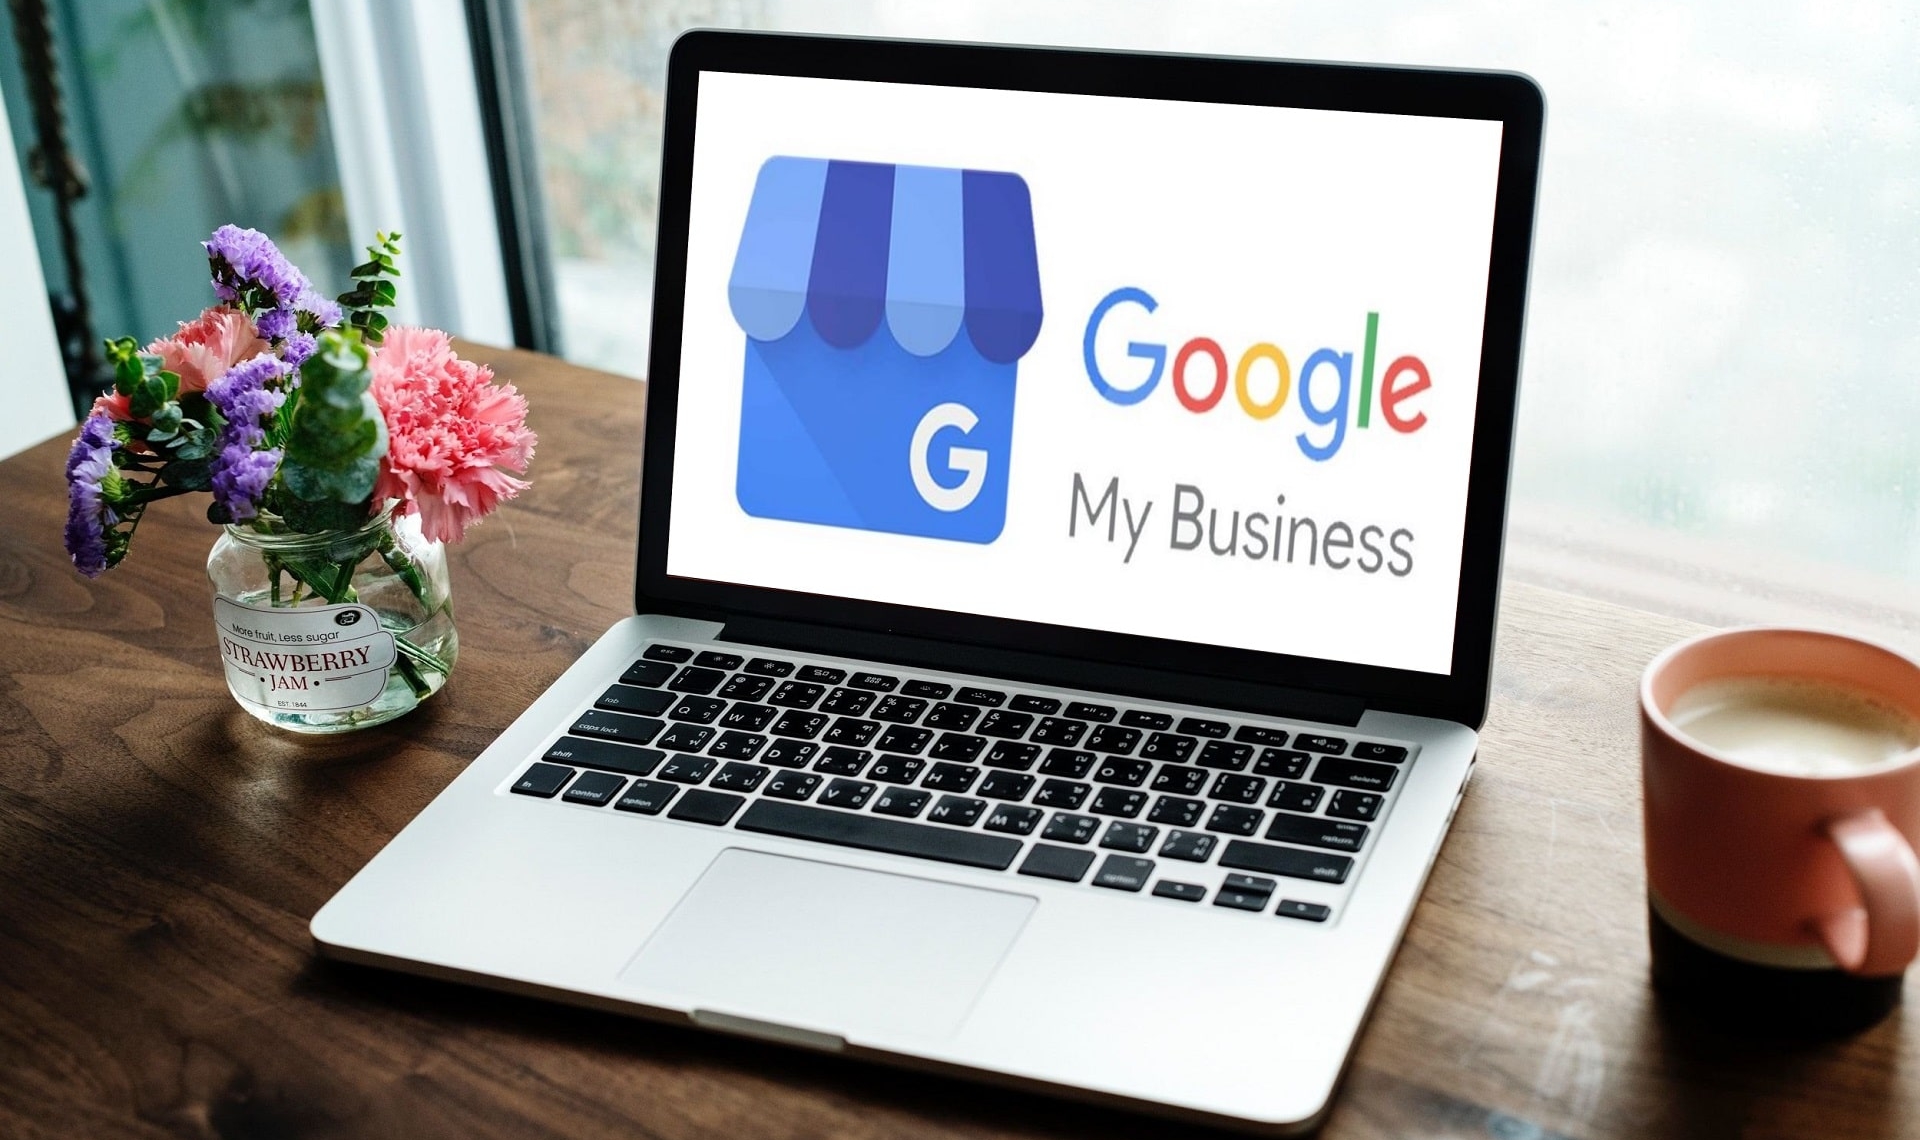 google my business support